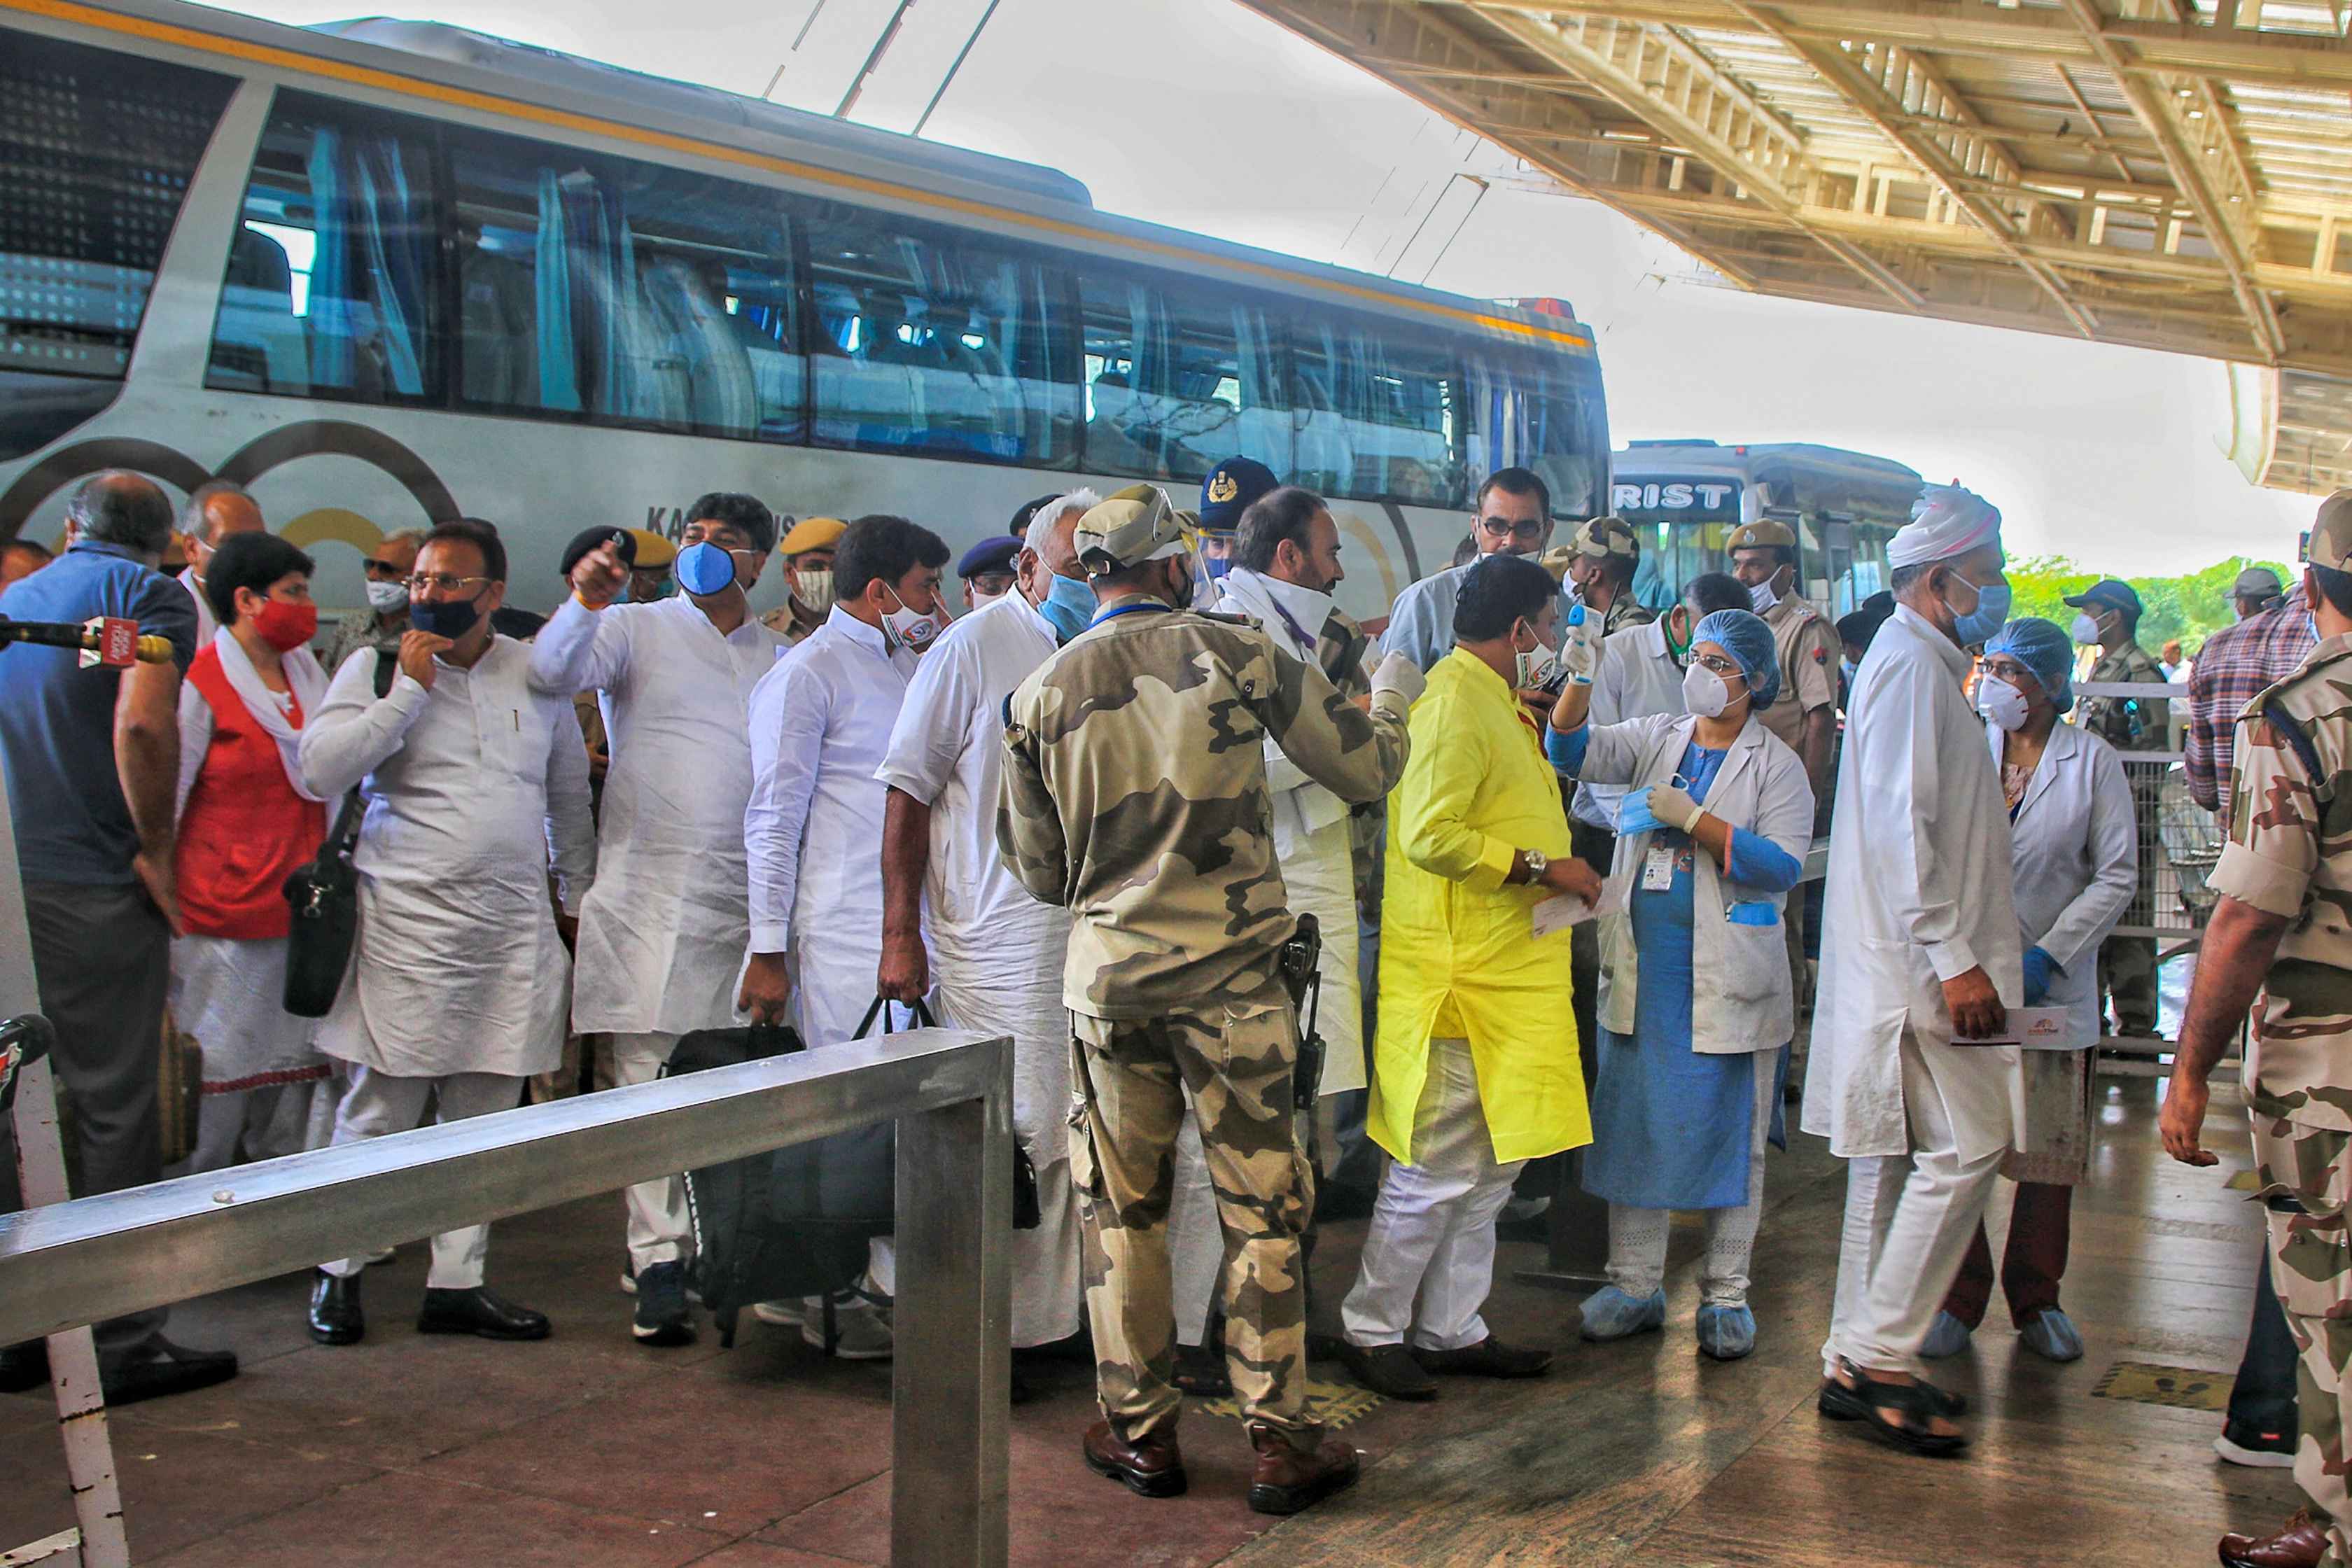 Rajasthan Congress MLAs arrive at Jaipur Airport as they shift to Jaisalmer, in Jaipur, Friday, July 31, 2020